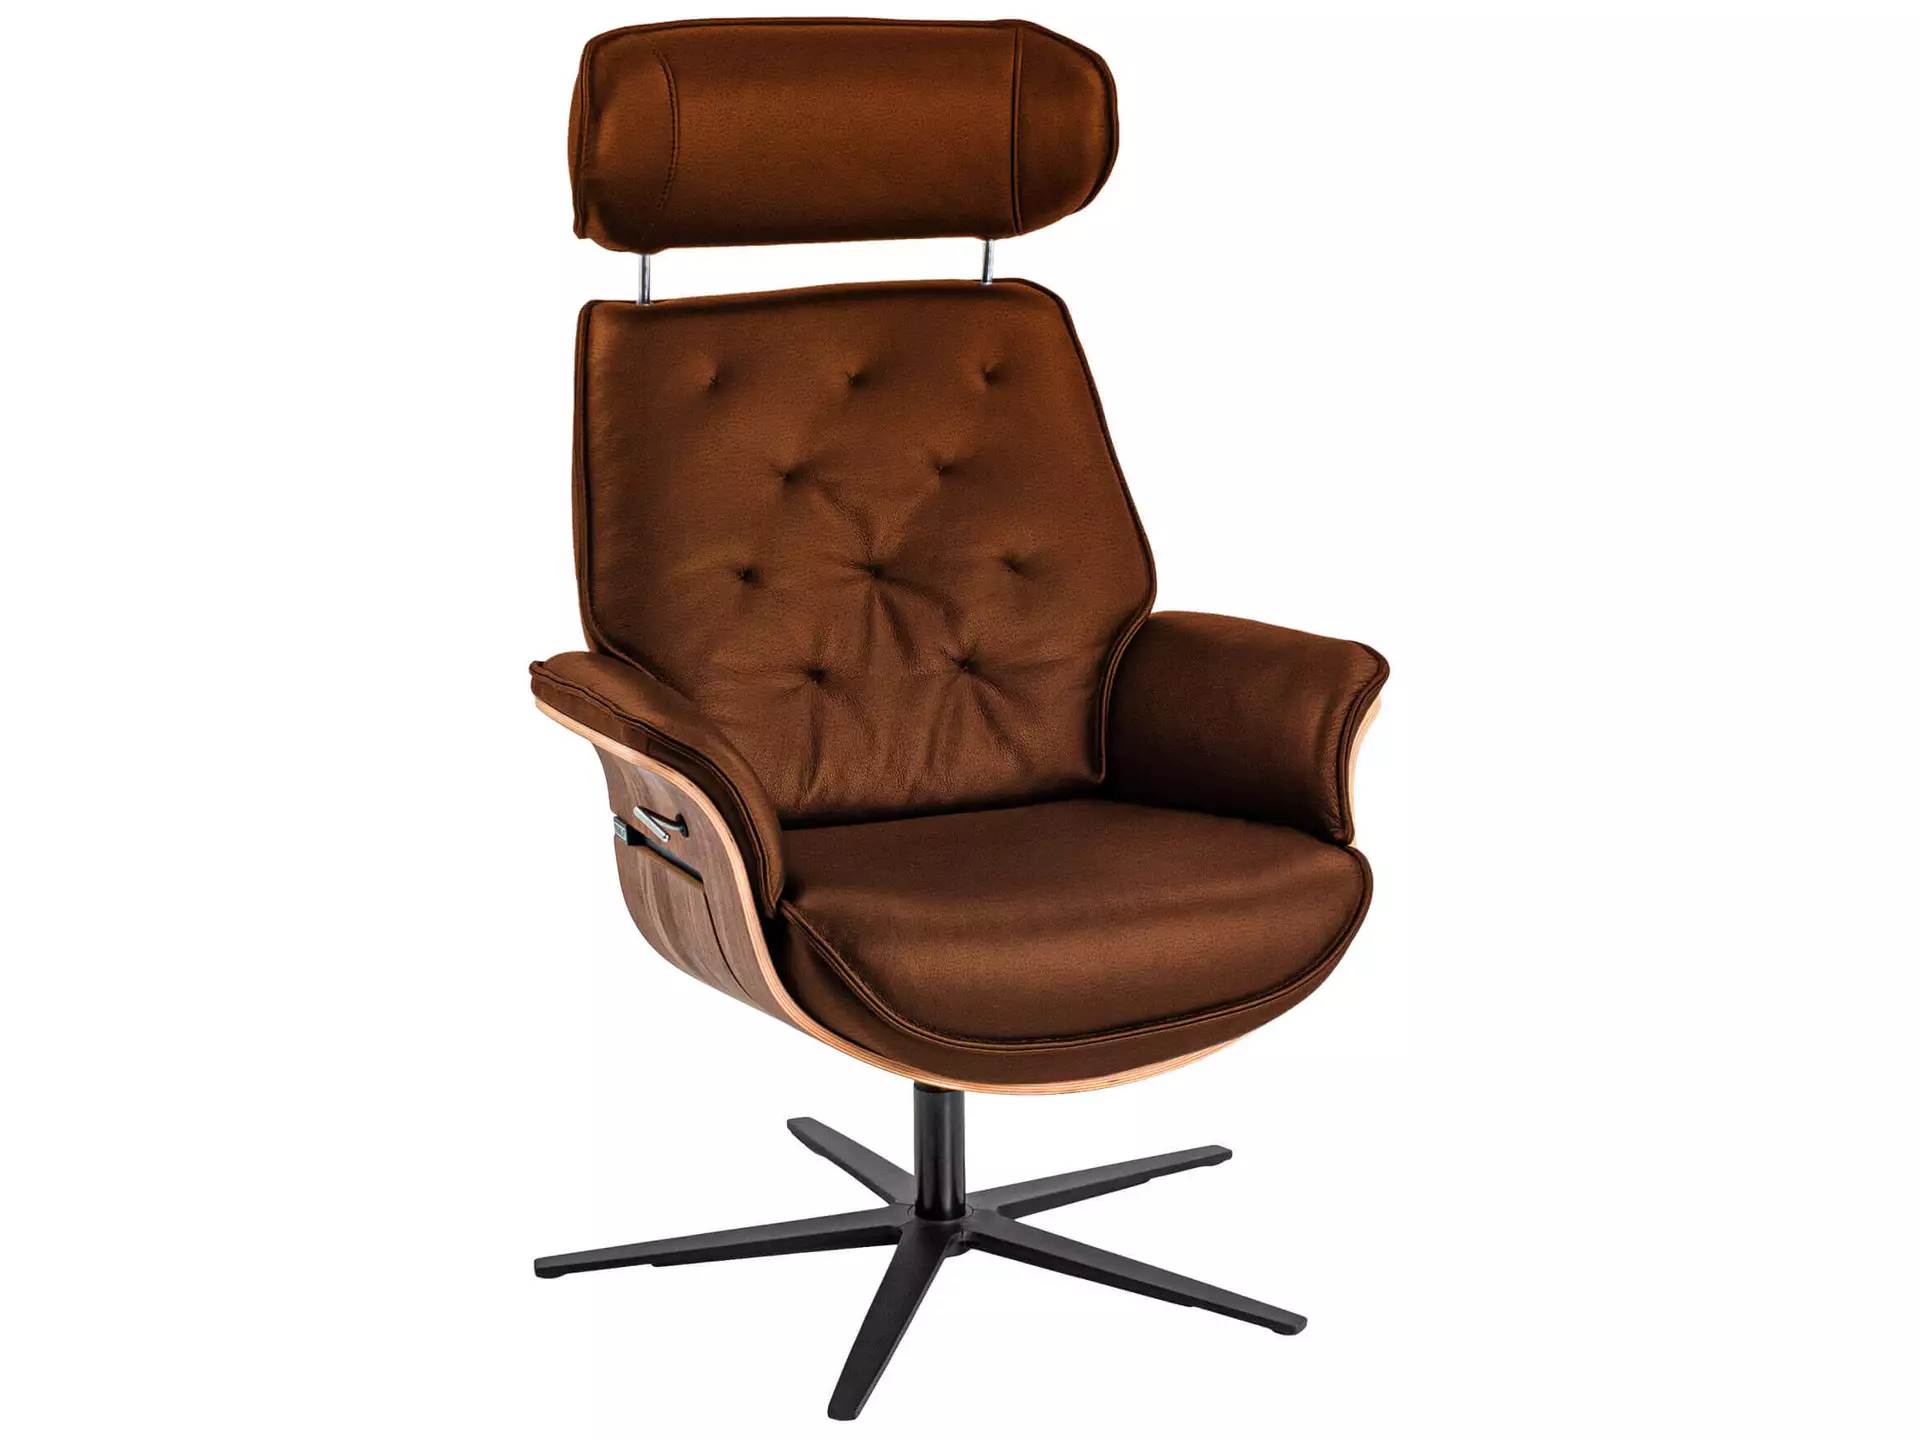 Relaxer Curacao Nussbaum Basic Polipol / Farbe: Zimt / Material: Stoff Basic